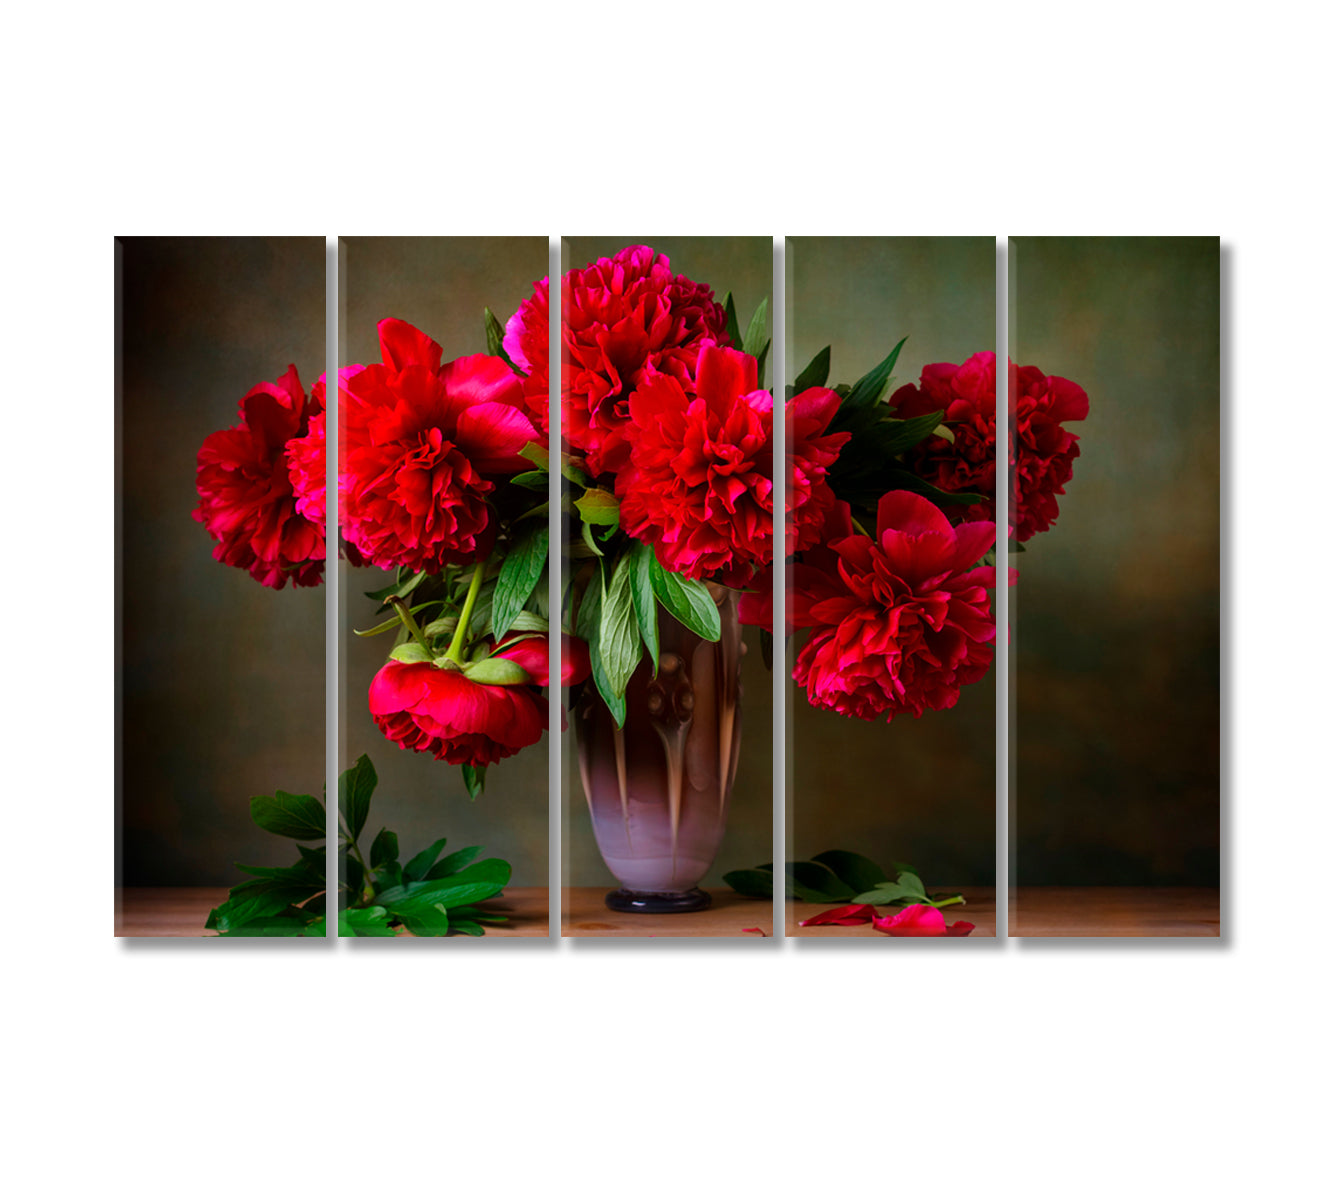 Still Life with Red Peonies Canvas Print-Canvas Print-CetArt-5 Panels-36x24 inches-CetArt